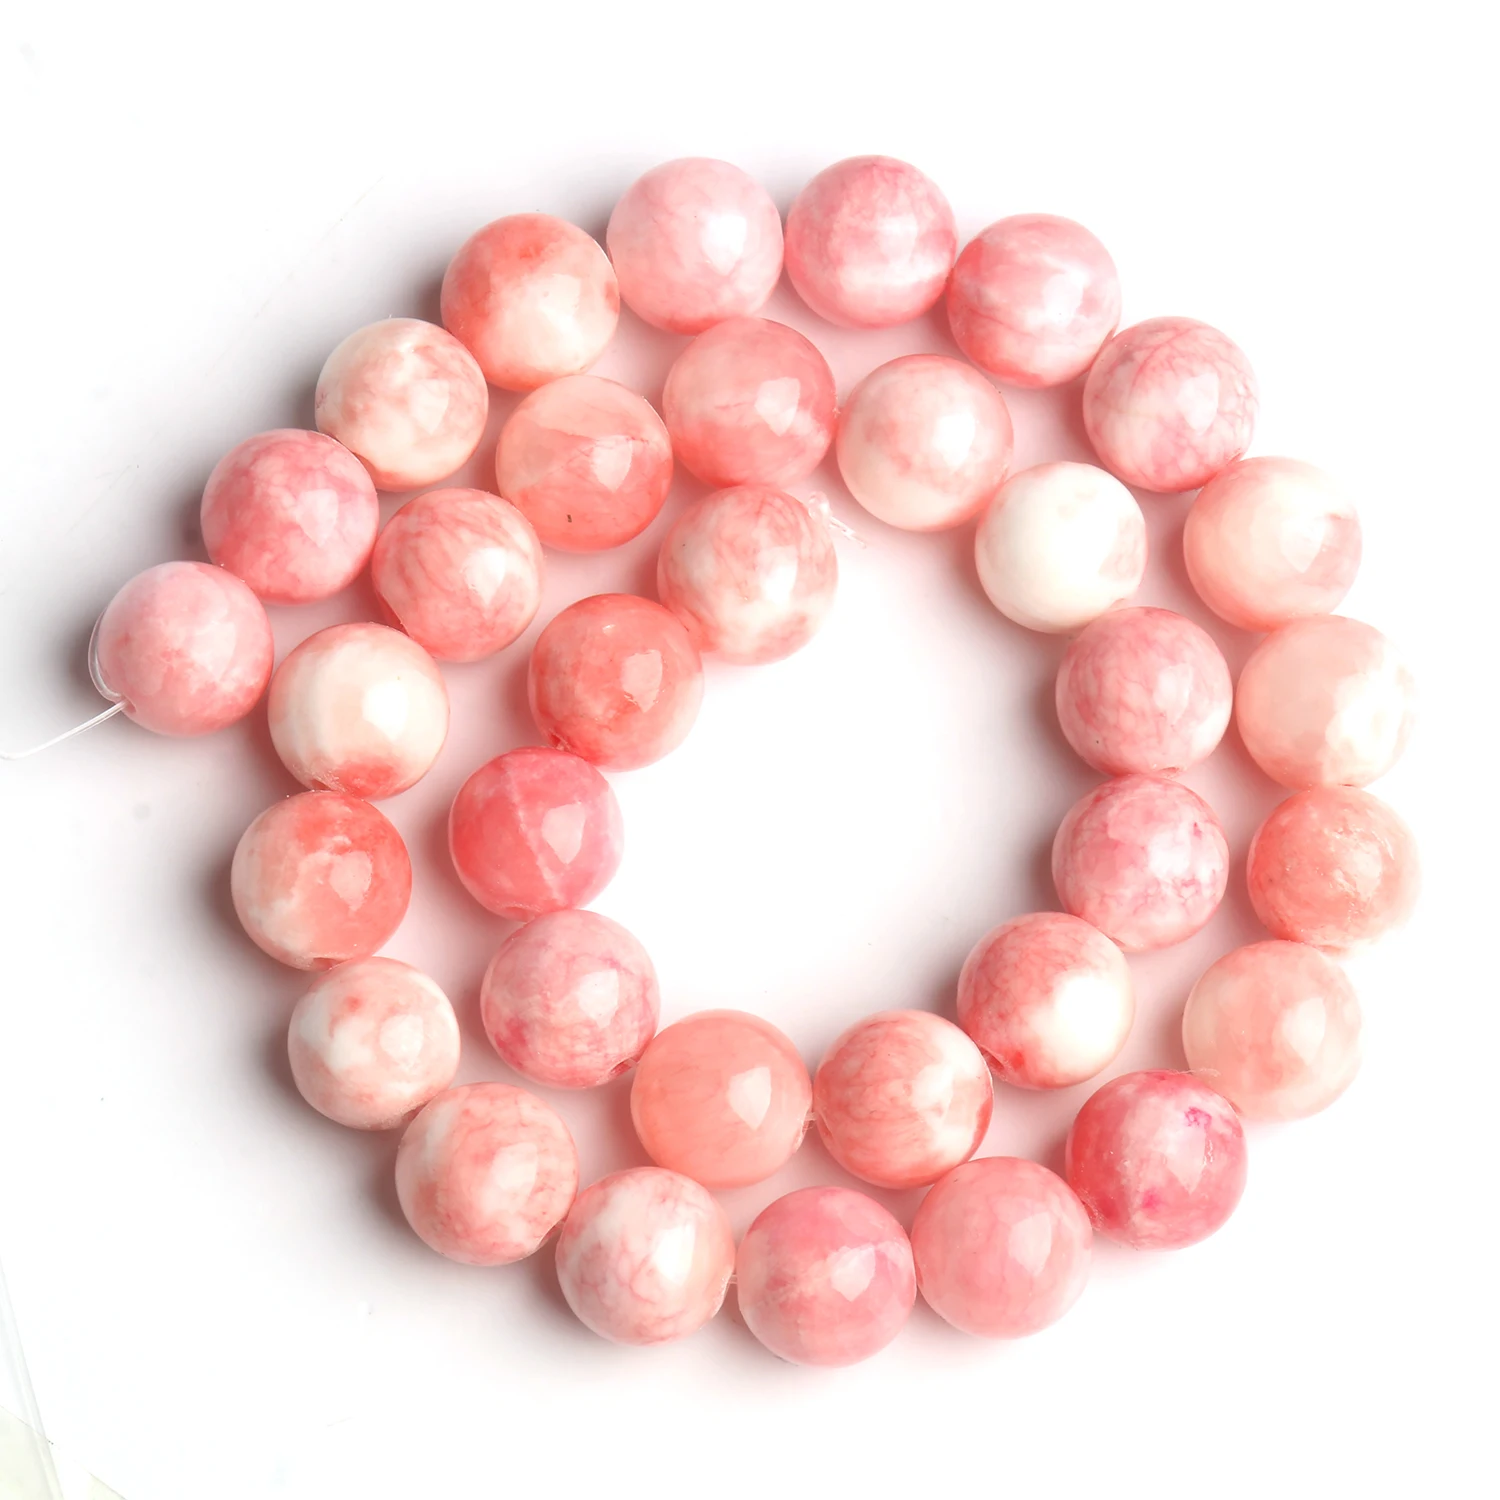 

Natural Stone Pink White Persian Jade Round Beads For Jewelry Making DIY Bracelet Necklace Pendant Accessories 4-12mm 15"